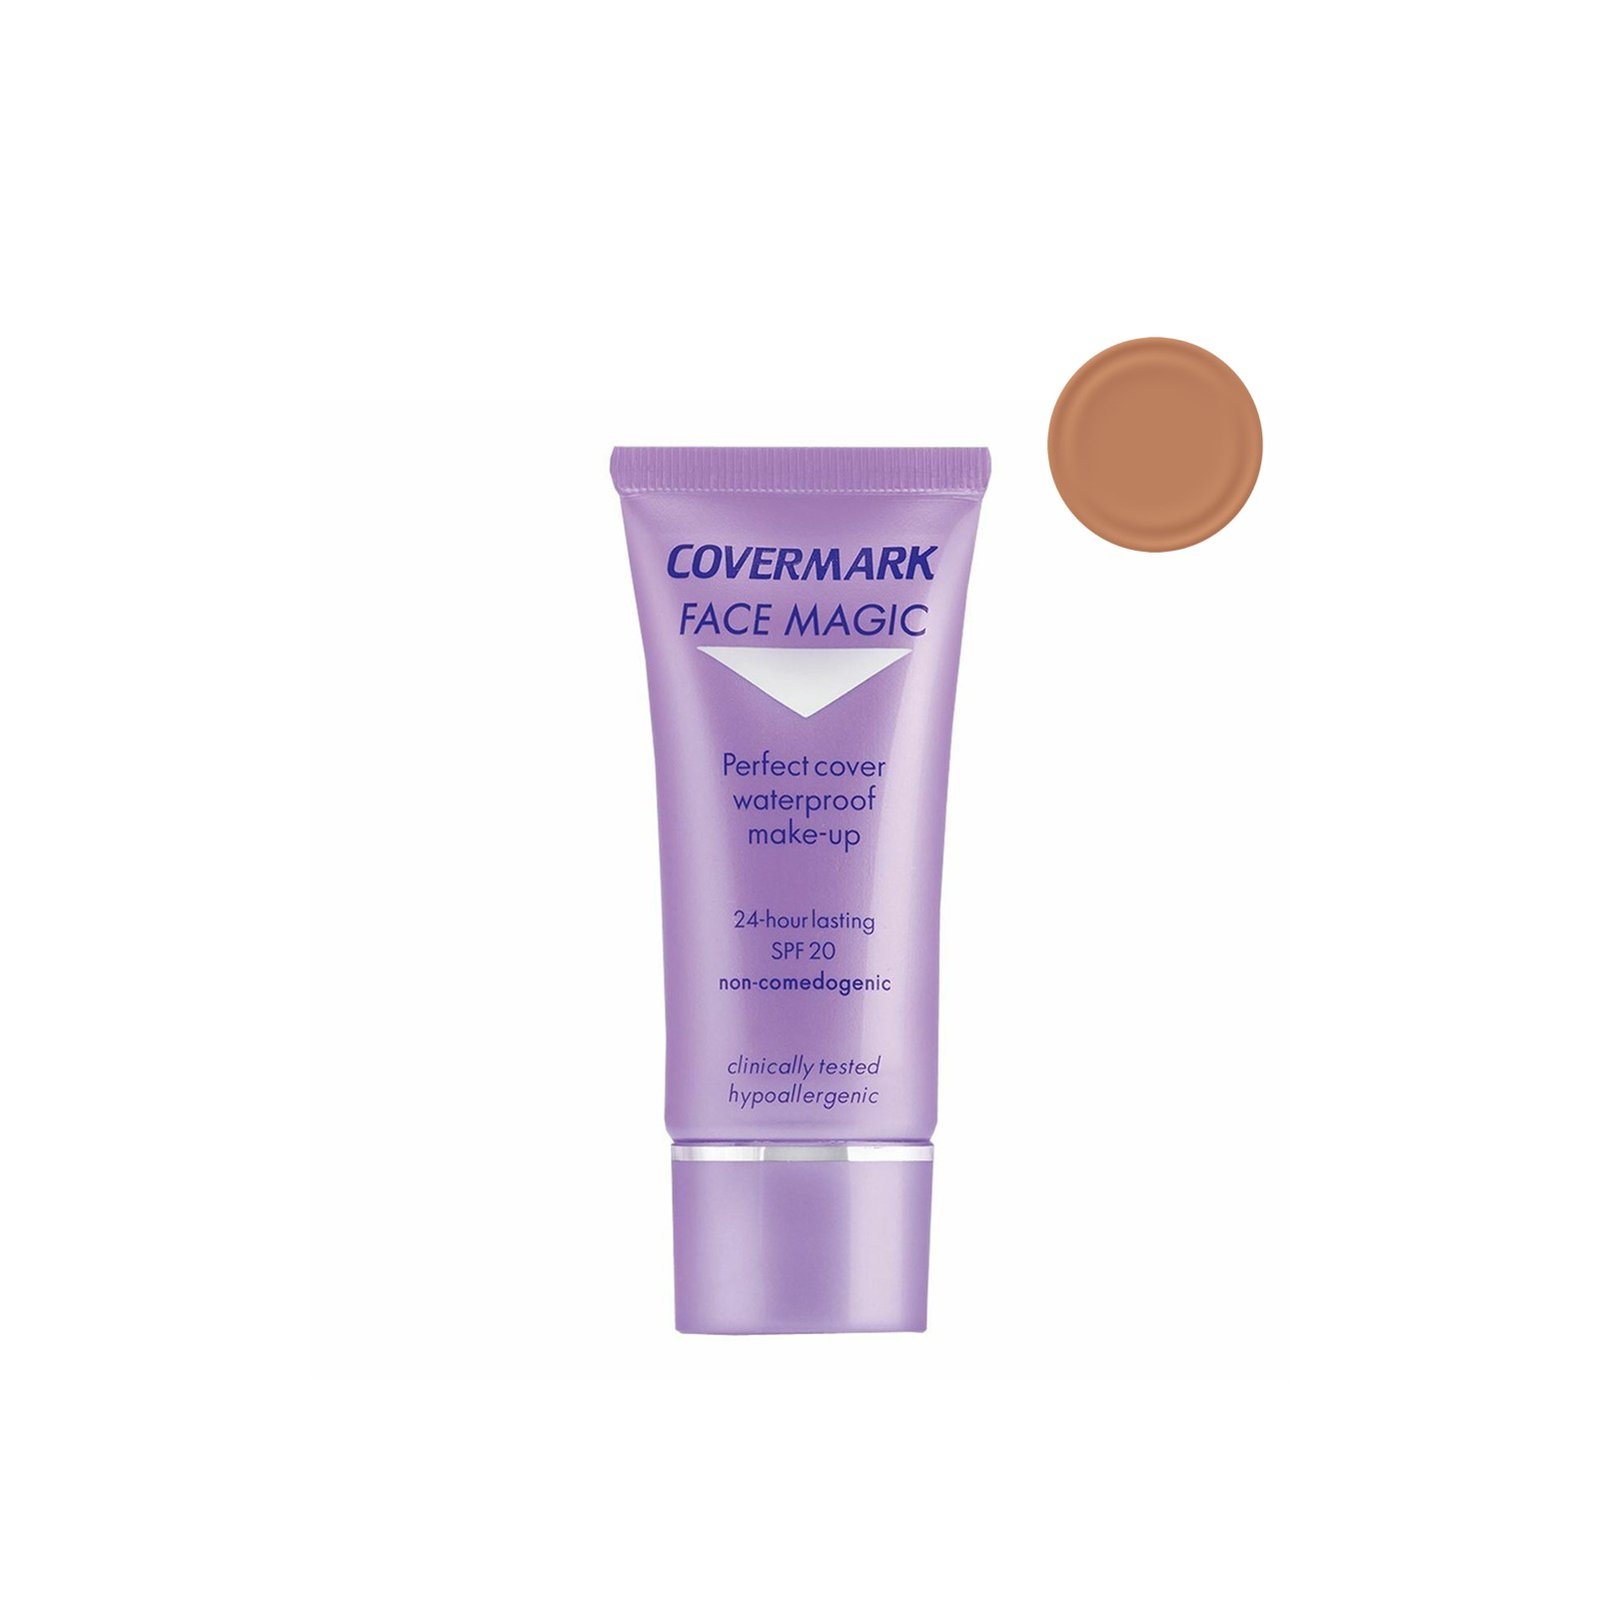 Covermark Face Magic Perfect Cover Waterproof Make-Up SPF20 10 30ml